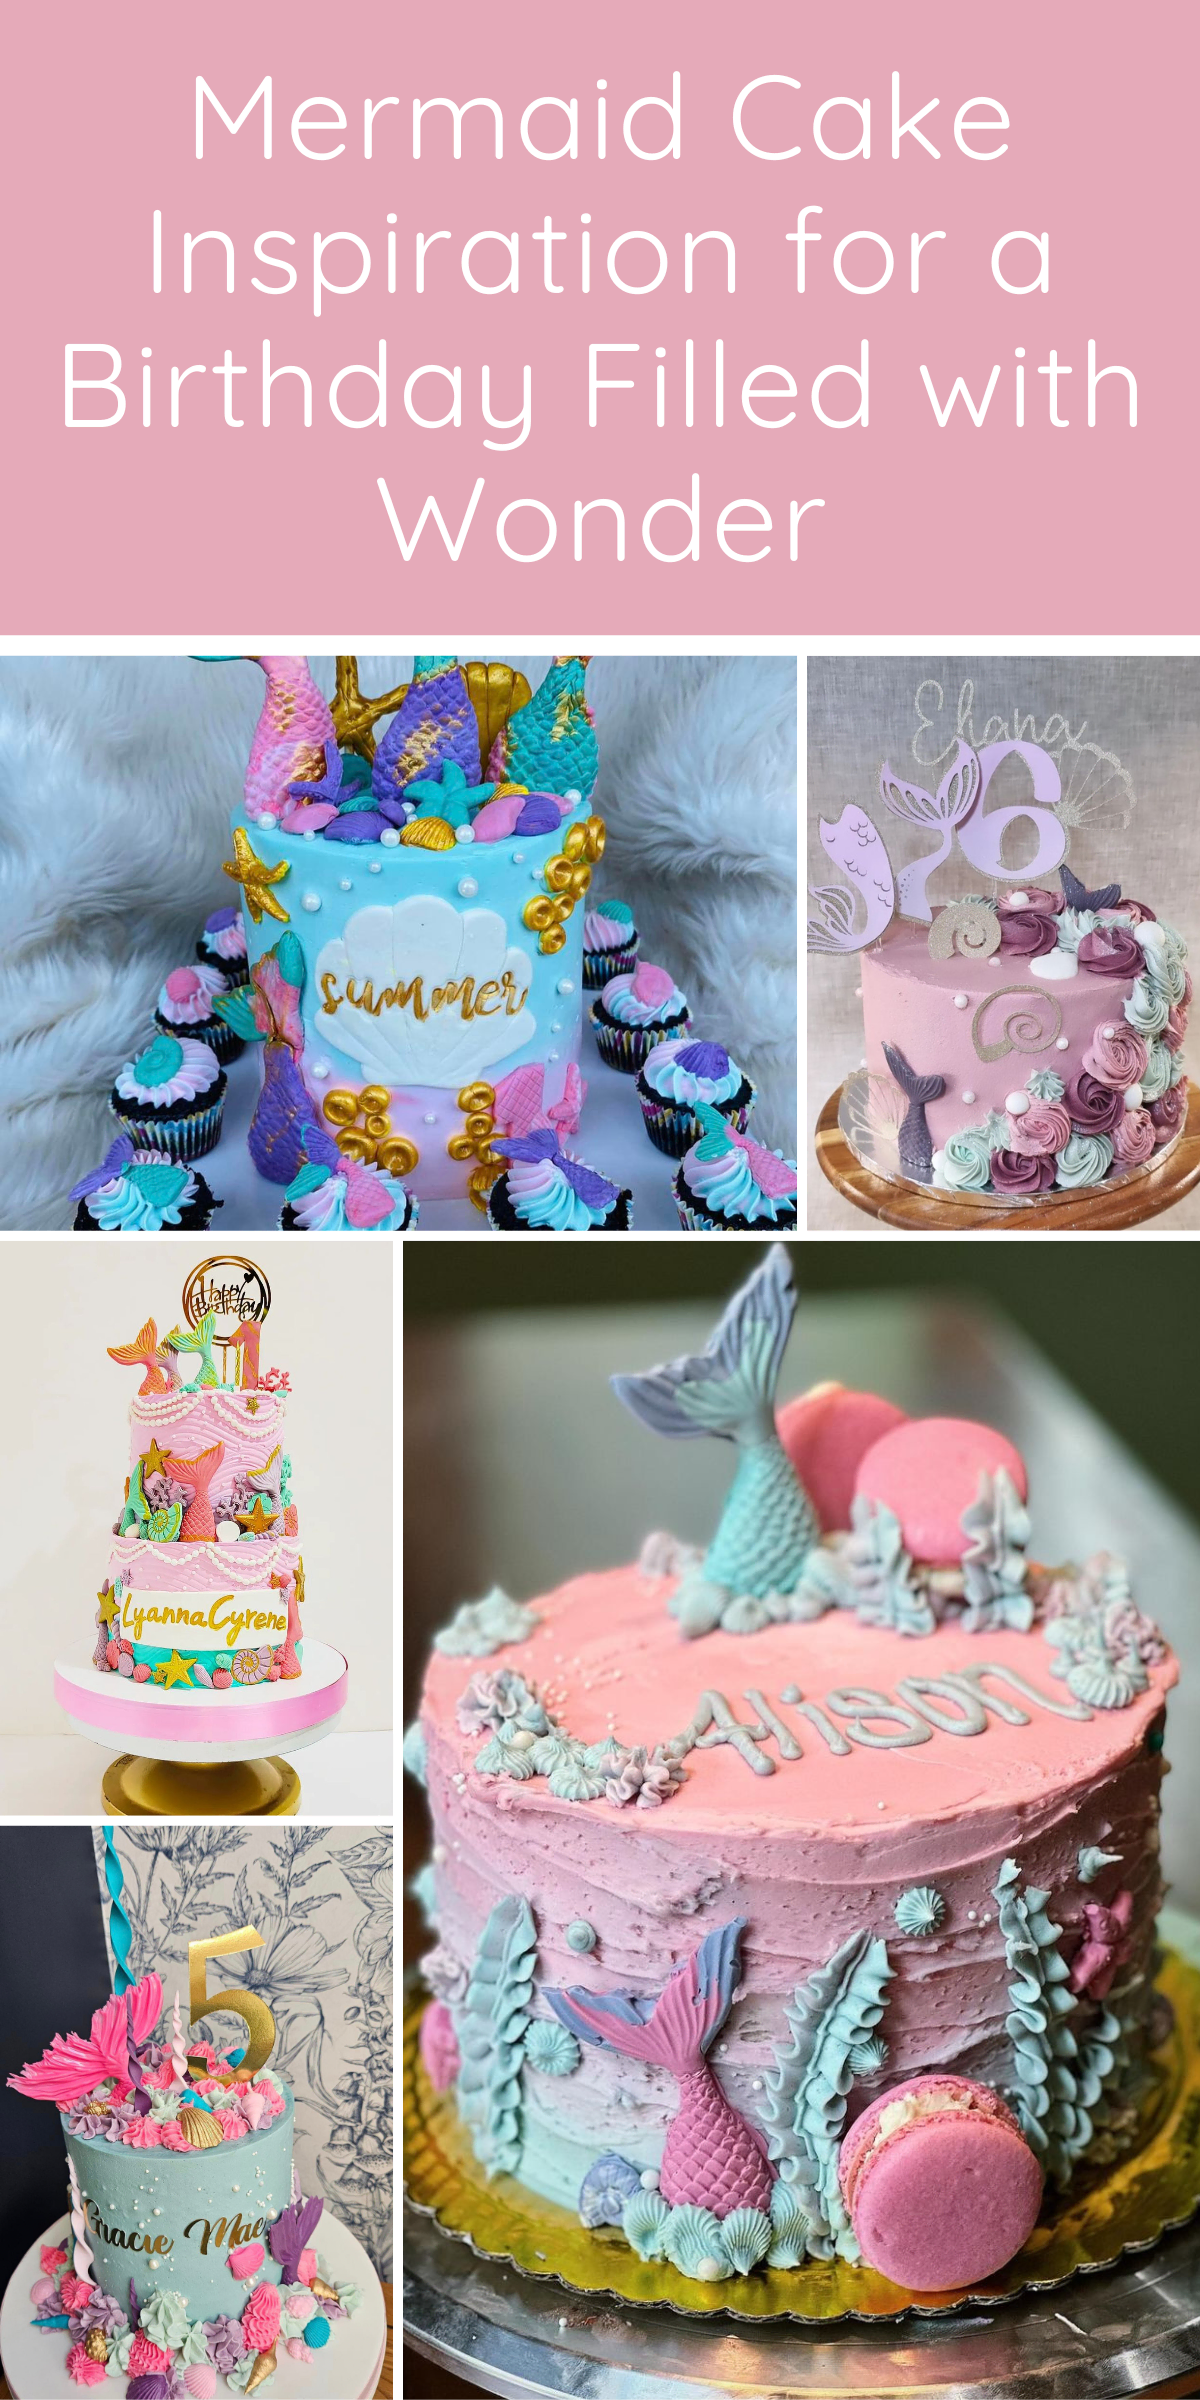 🎂🧜‍♀️ Dive into the world of mermaid birthday cakes! 🌊✨ From classic mermaid tails to underwater scenes, we’ve got magical cake ideas that will make your party a splash! 🎉🦀 Get all the fin-tastic inspiration and find out how to create a cake that’s sure to make waves! 🐚🧁